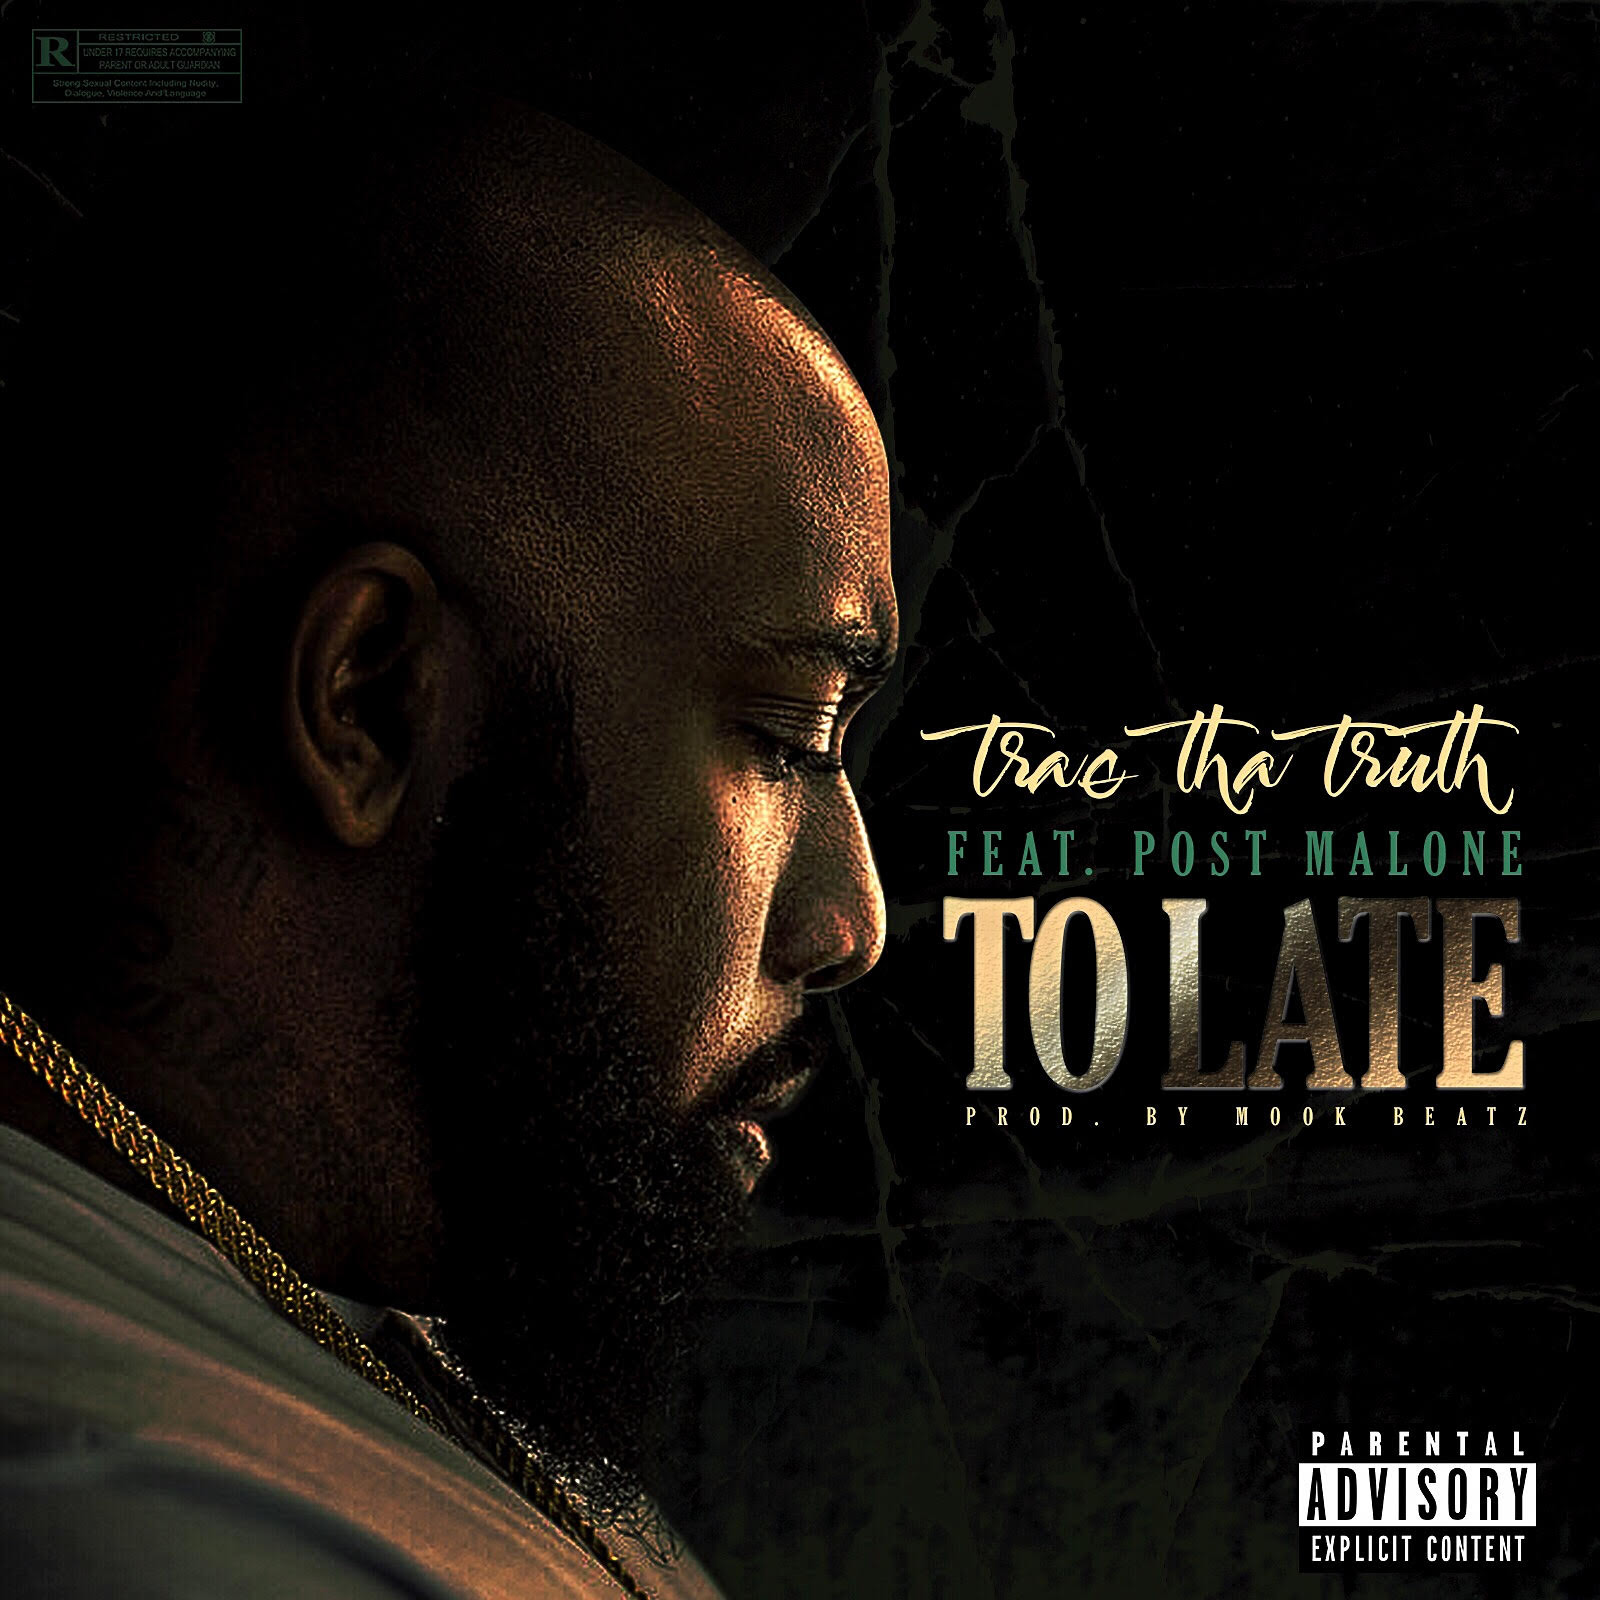 New Music: Trae Tha Truth – “To Late” Feat. Post Malone [LISTEN]